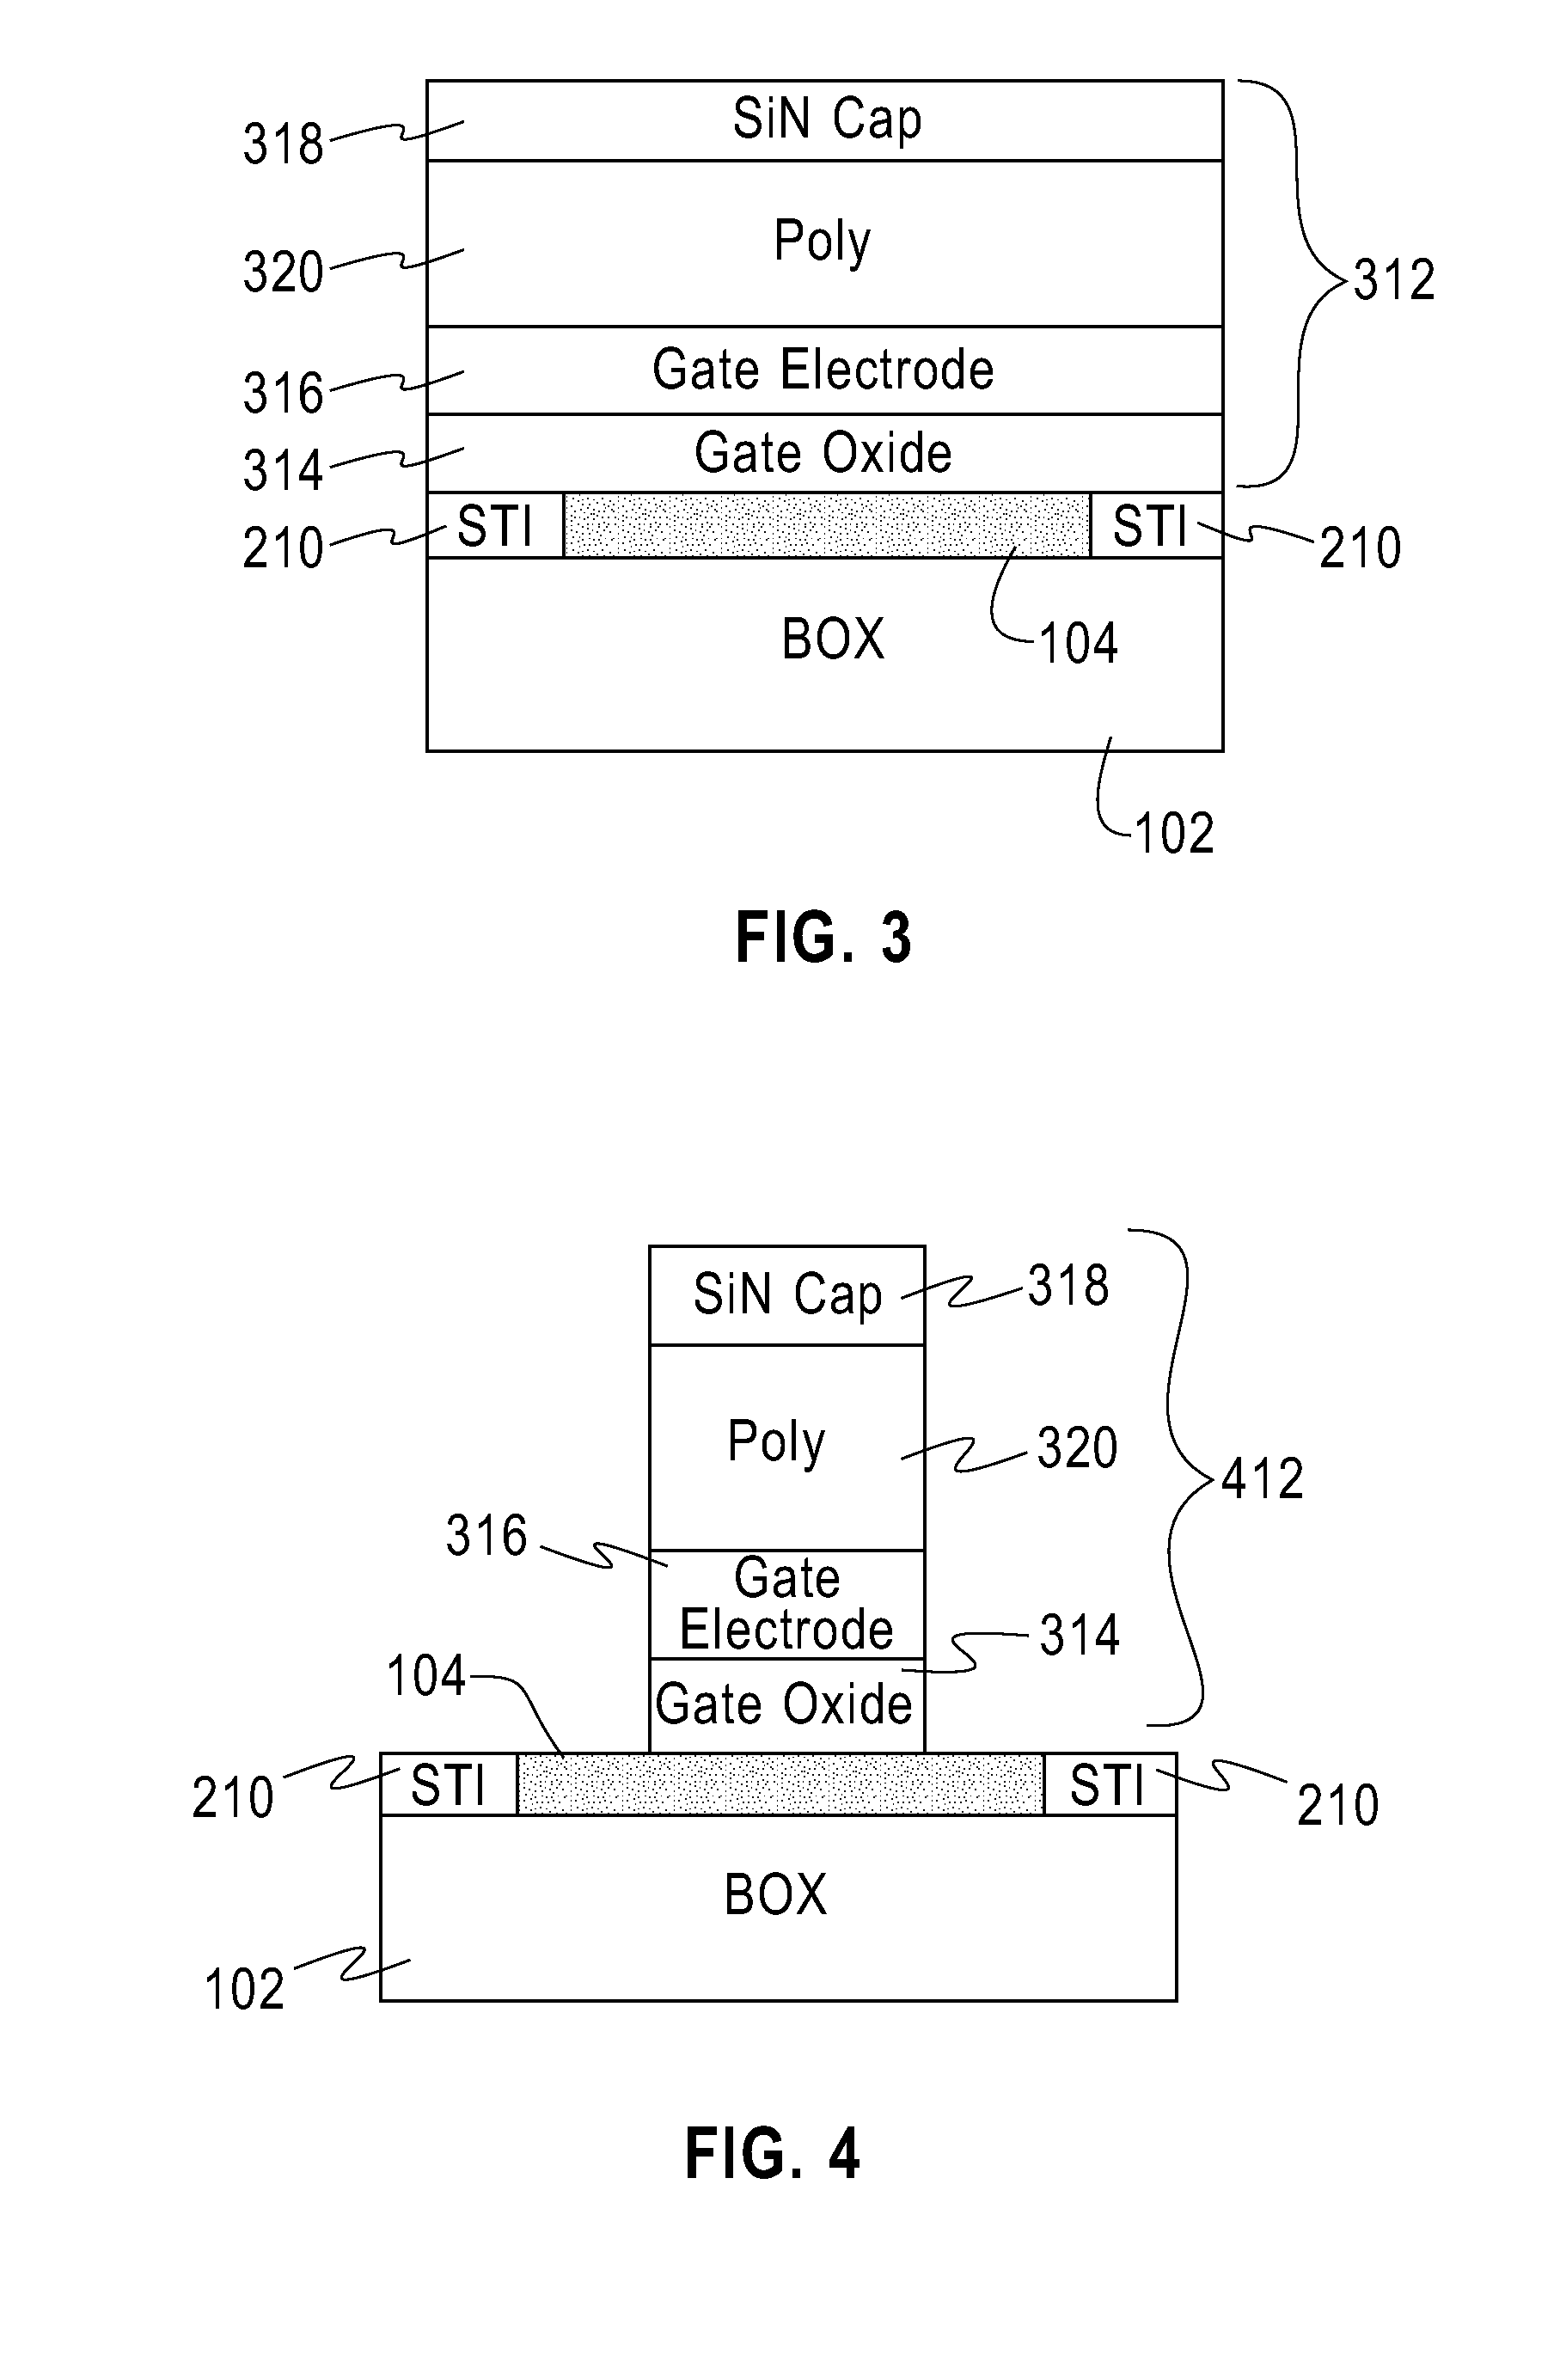 Thin body silicon-on-insulator transistor with borderless self-aligned contacts